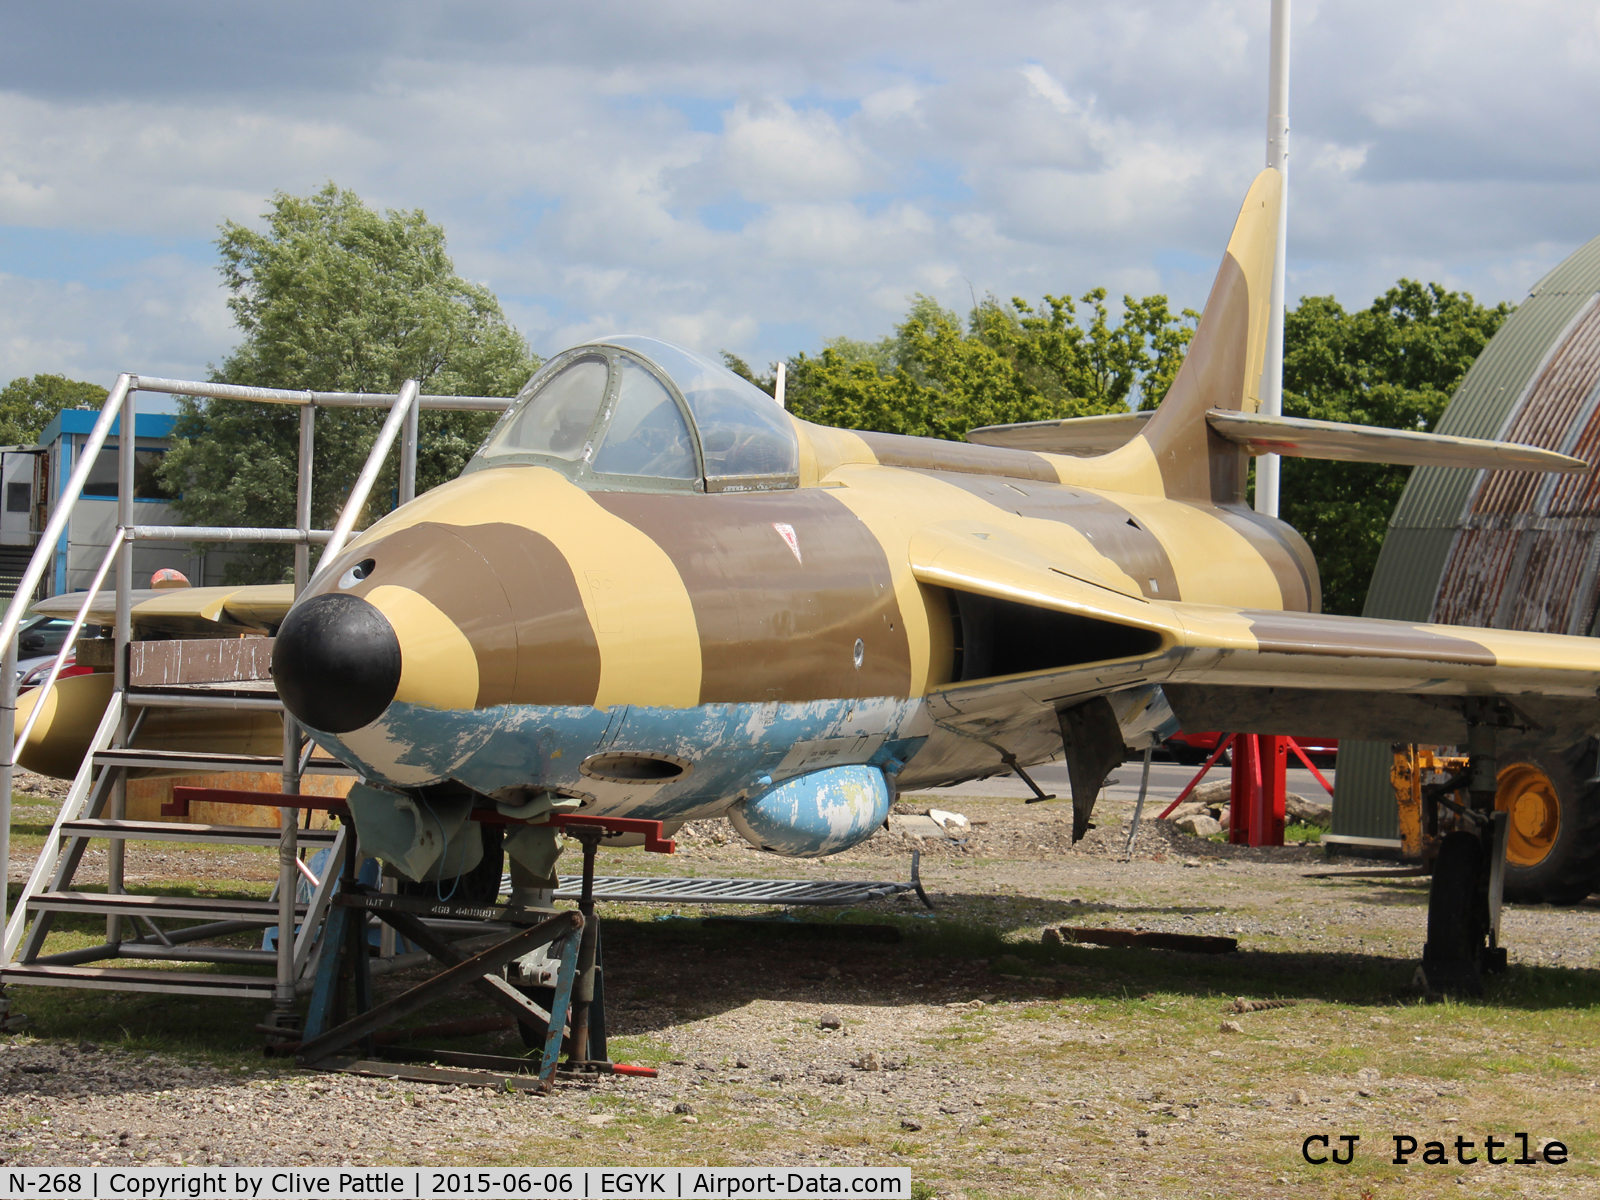 N-268, Hawker Hunter FGA.78 C/N 8947, Looking rather the worse for wear - On display at the Yorkshire Air Museum, Elvington, EGYK